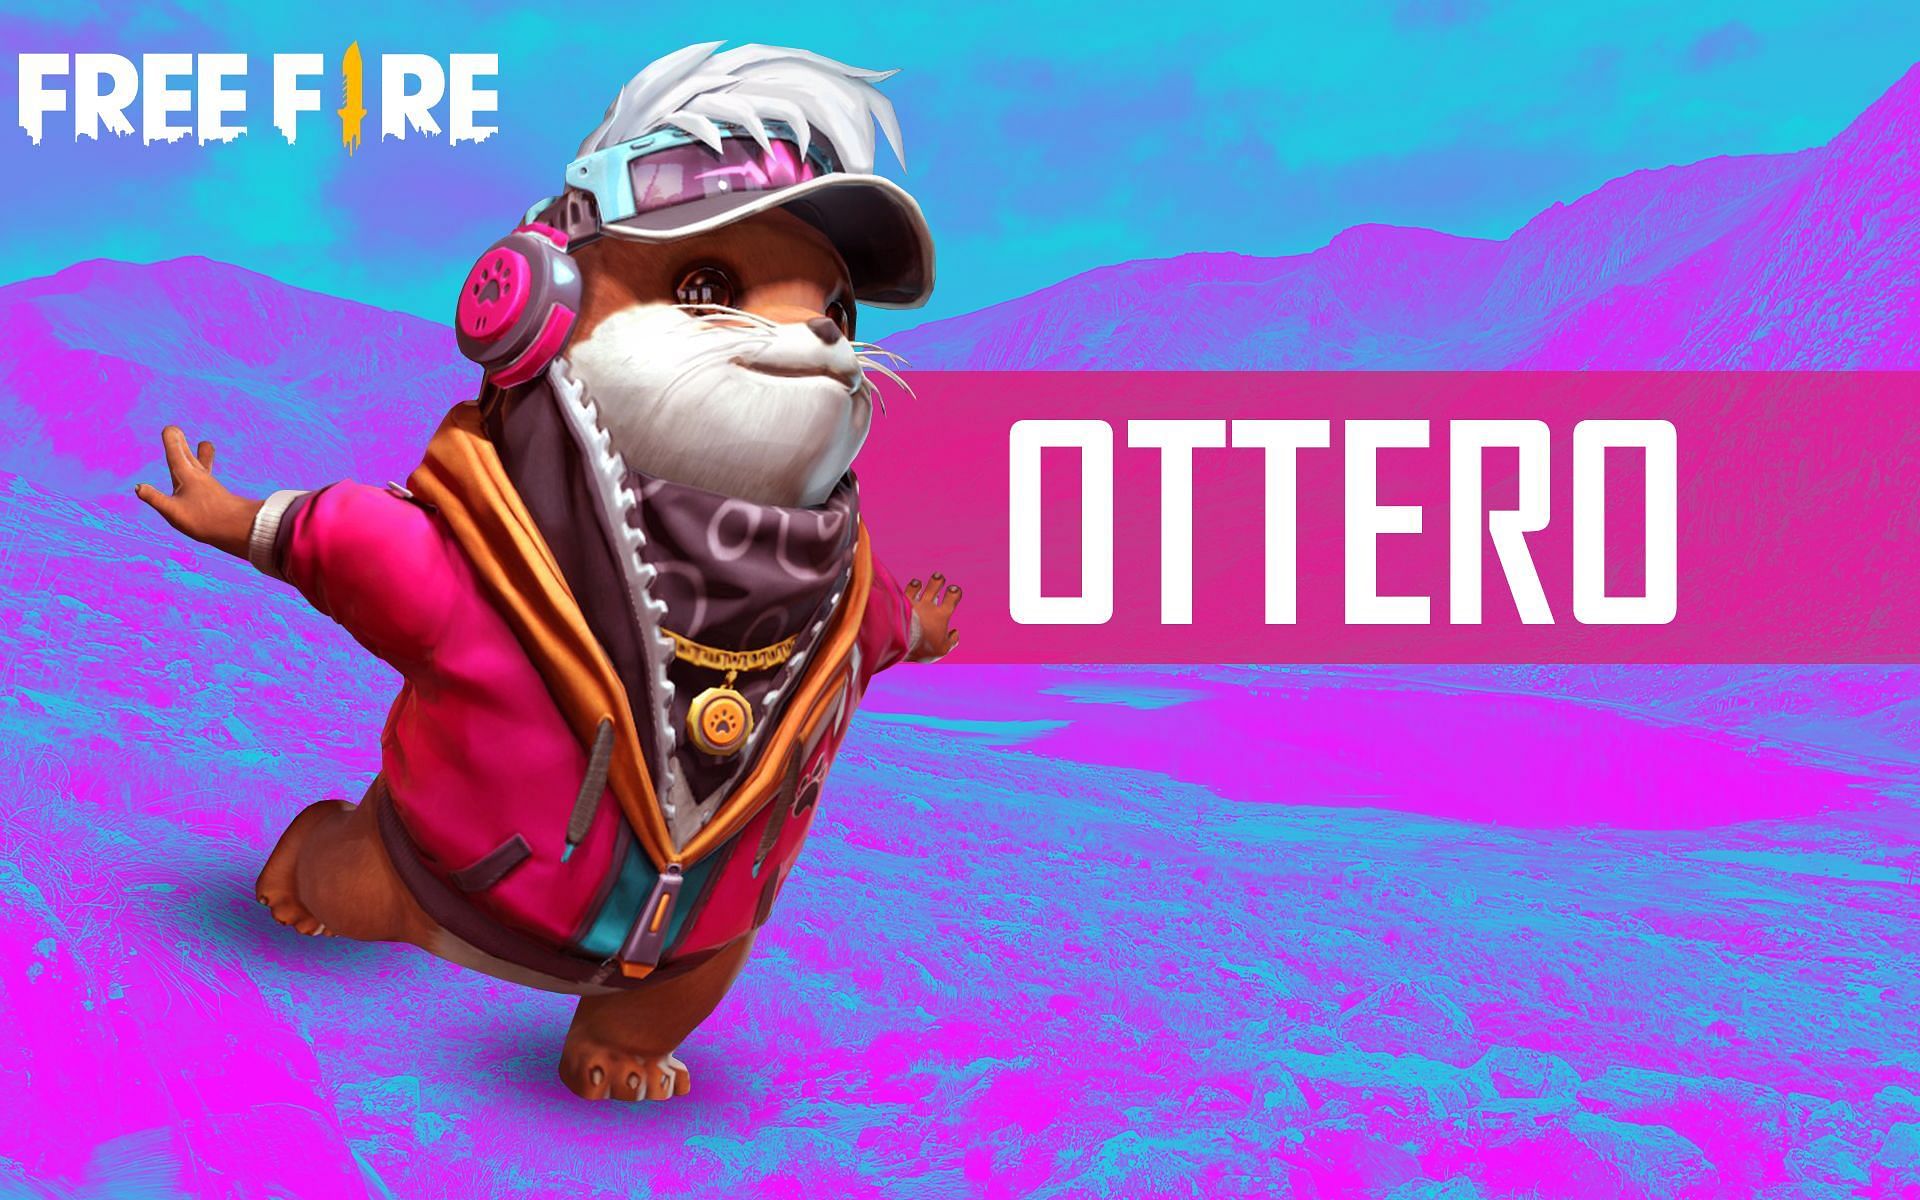 Ottero is available for free (Image via Free Fire)